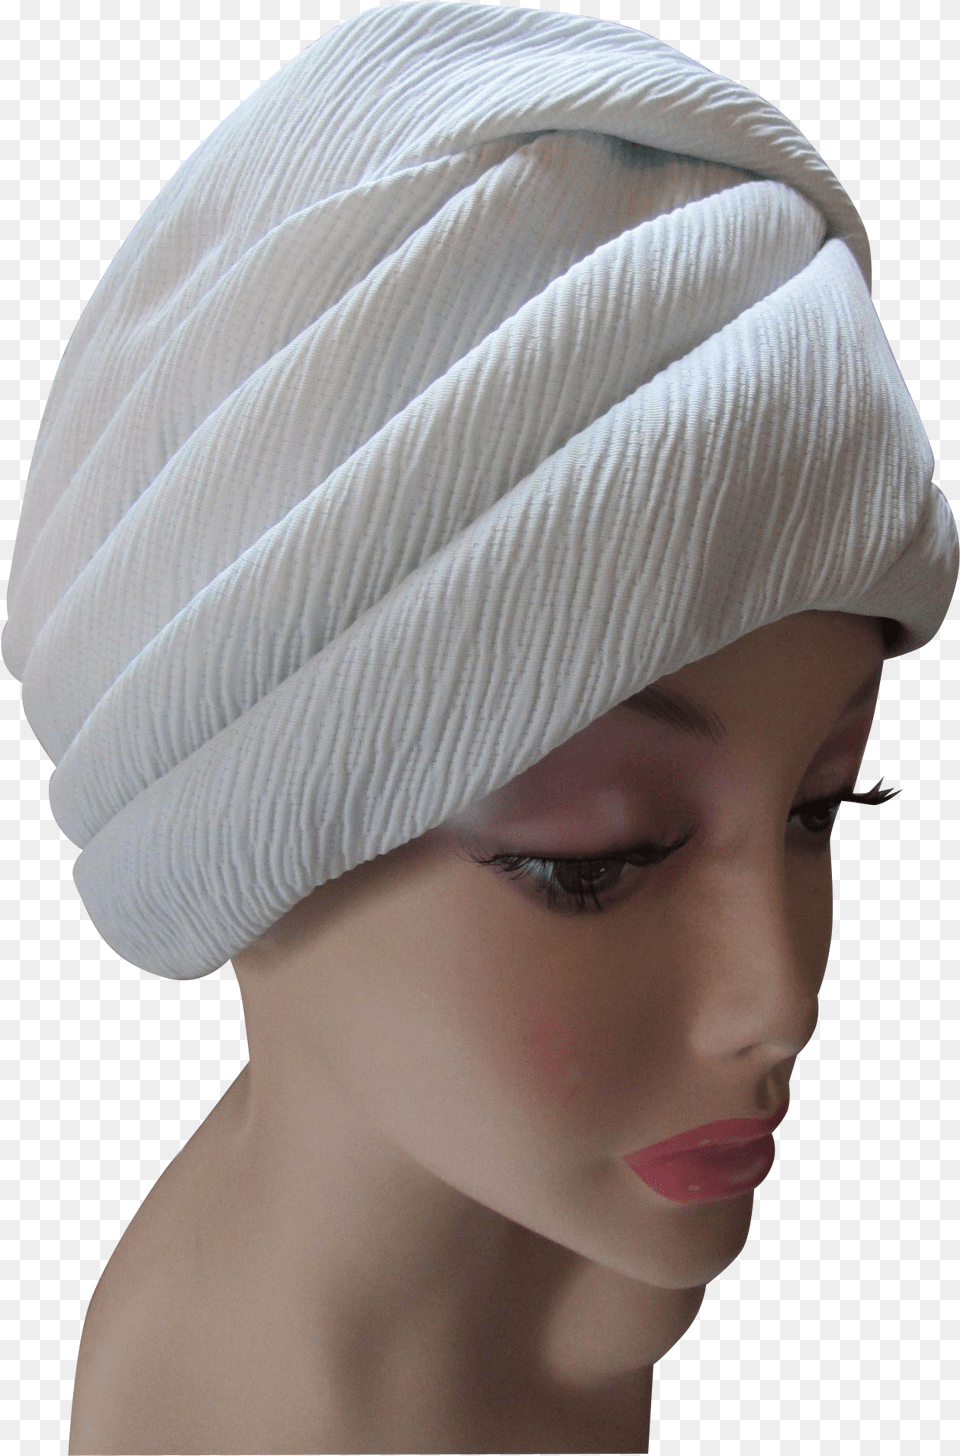 Beanie, Cap, Clothing, Hat, Adult Png Image